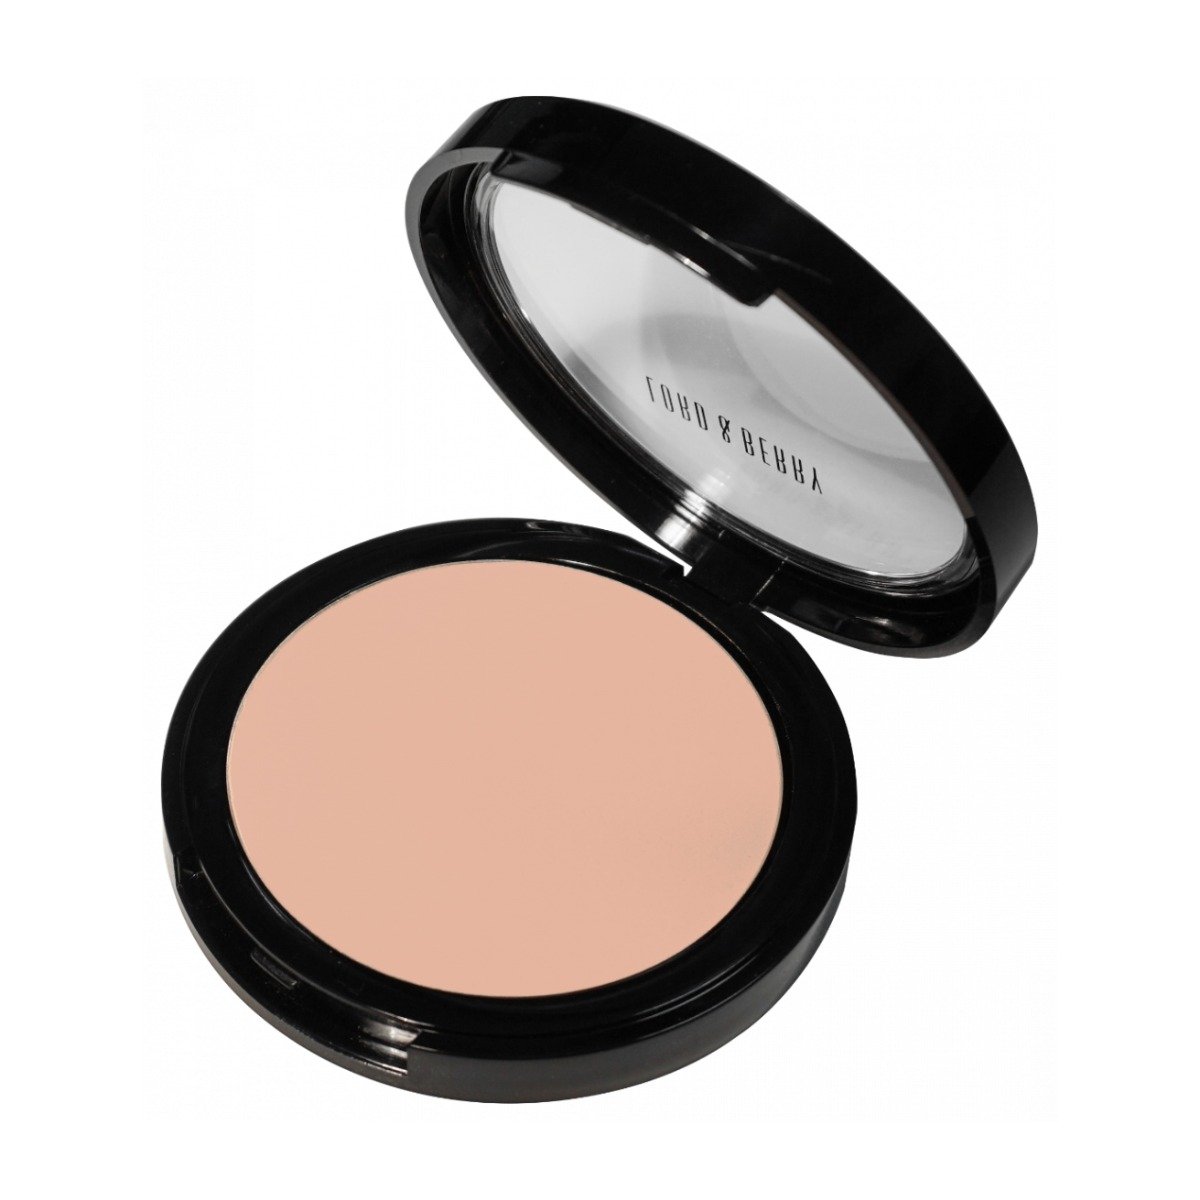 Lord & Berry Face Pressed Powder - Bloom Pharmacy